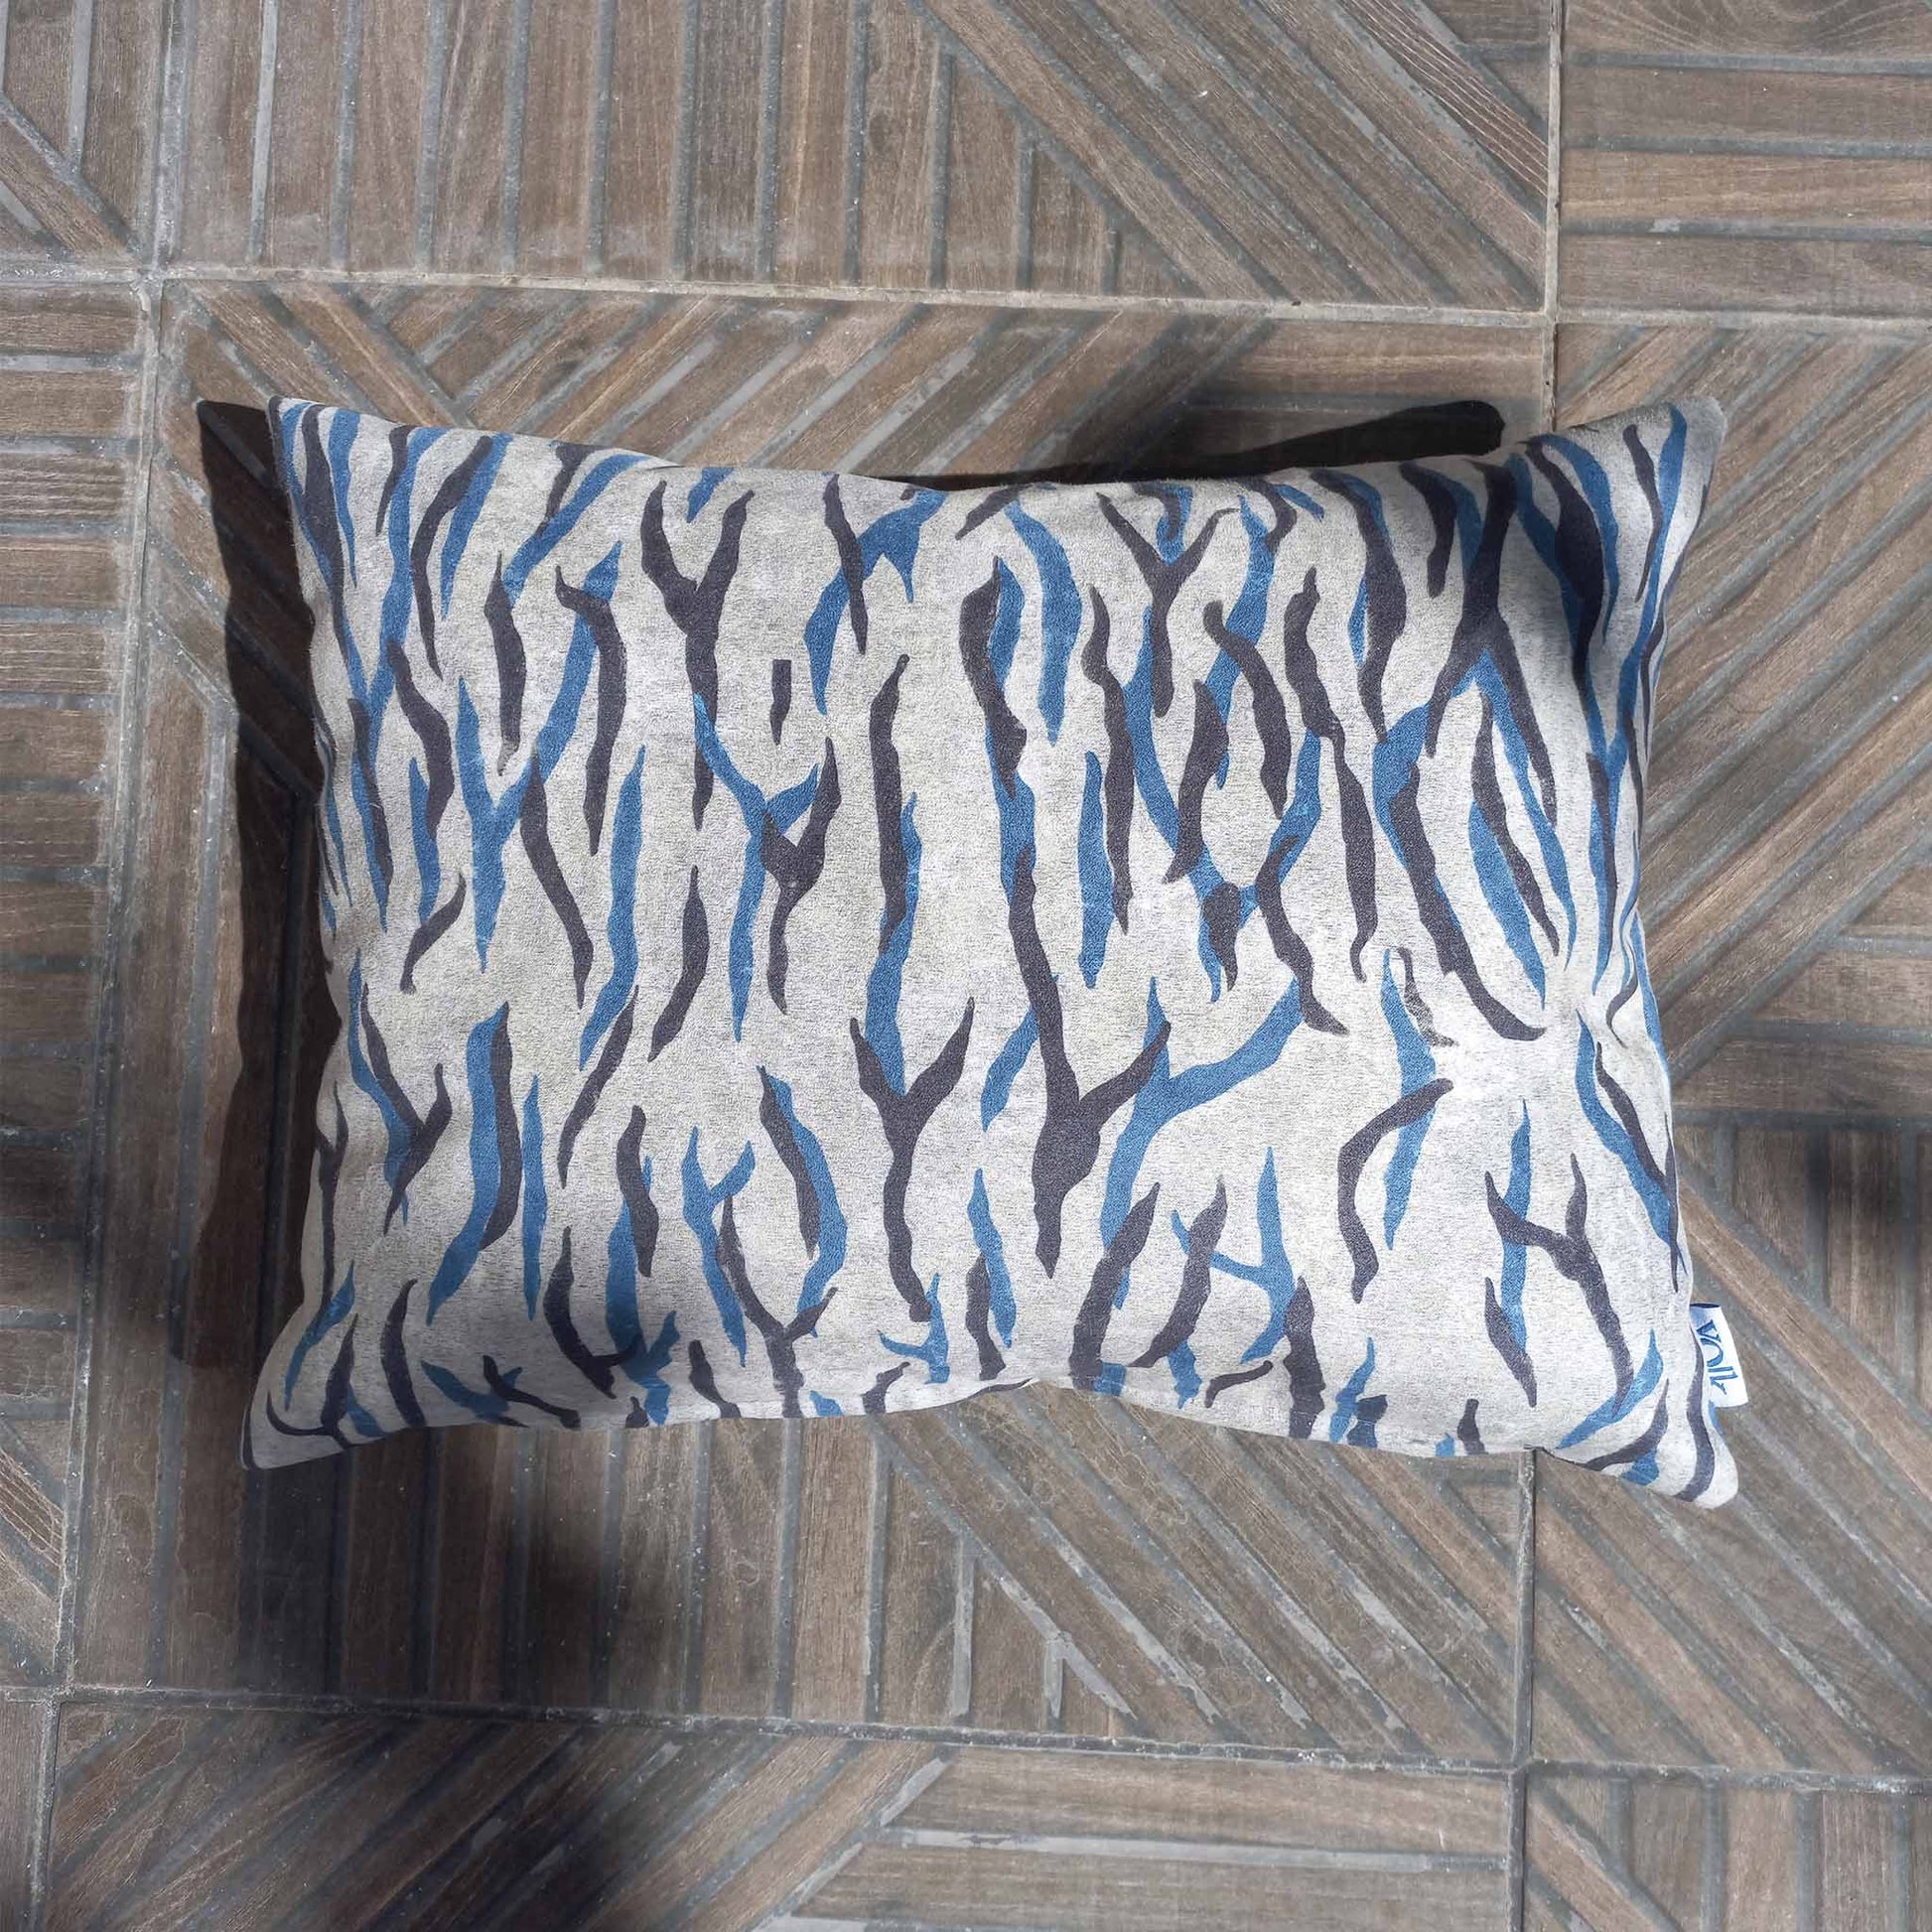 Printed decorative cushion outside on a patio floor